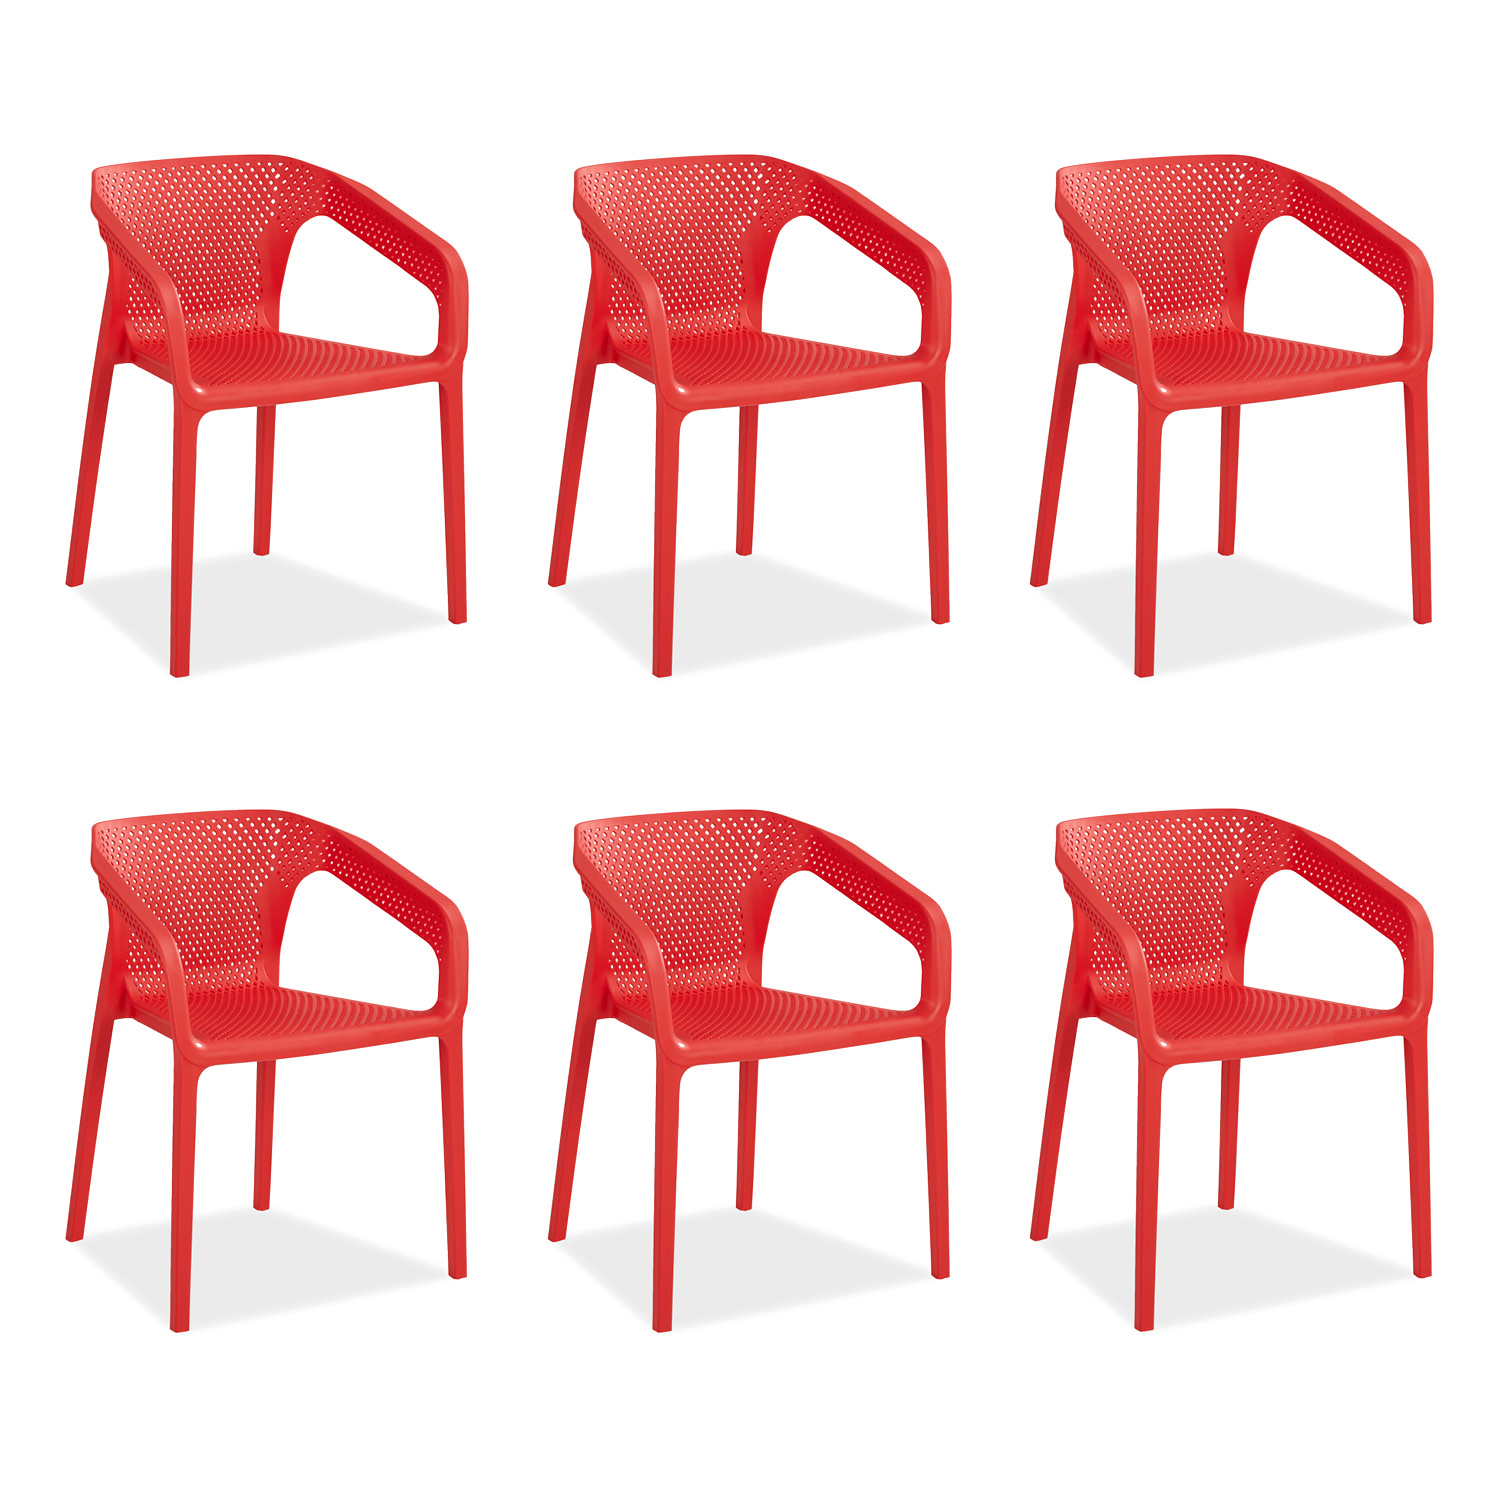 Set of 6 Garden chair with armrests Camping chairs Red Outdoor chairs Plastic Egg chair Lounger chairs Stacking chairs